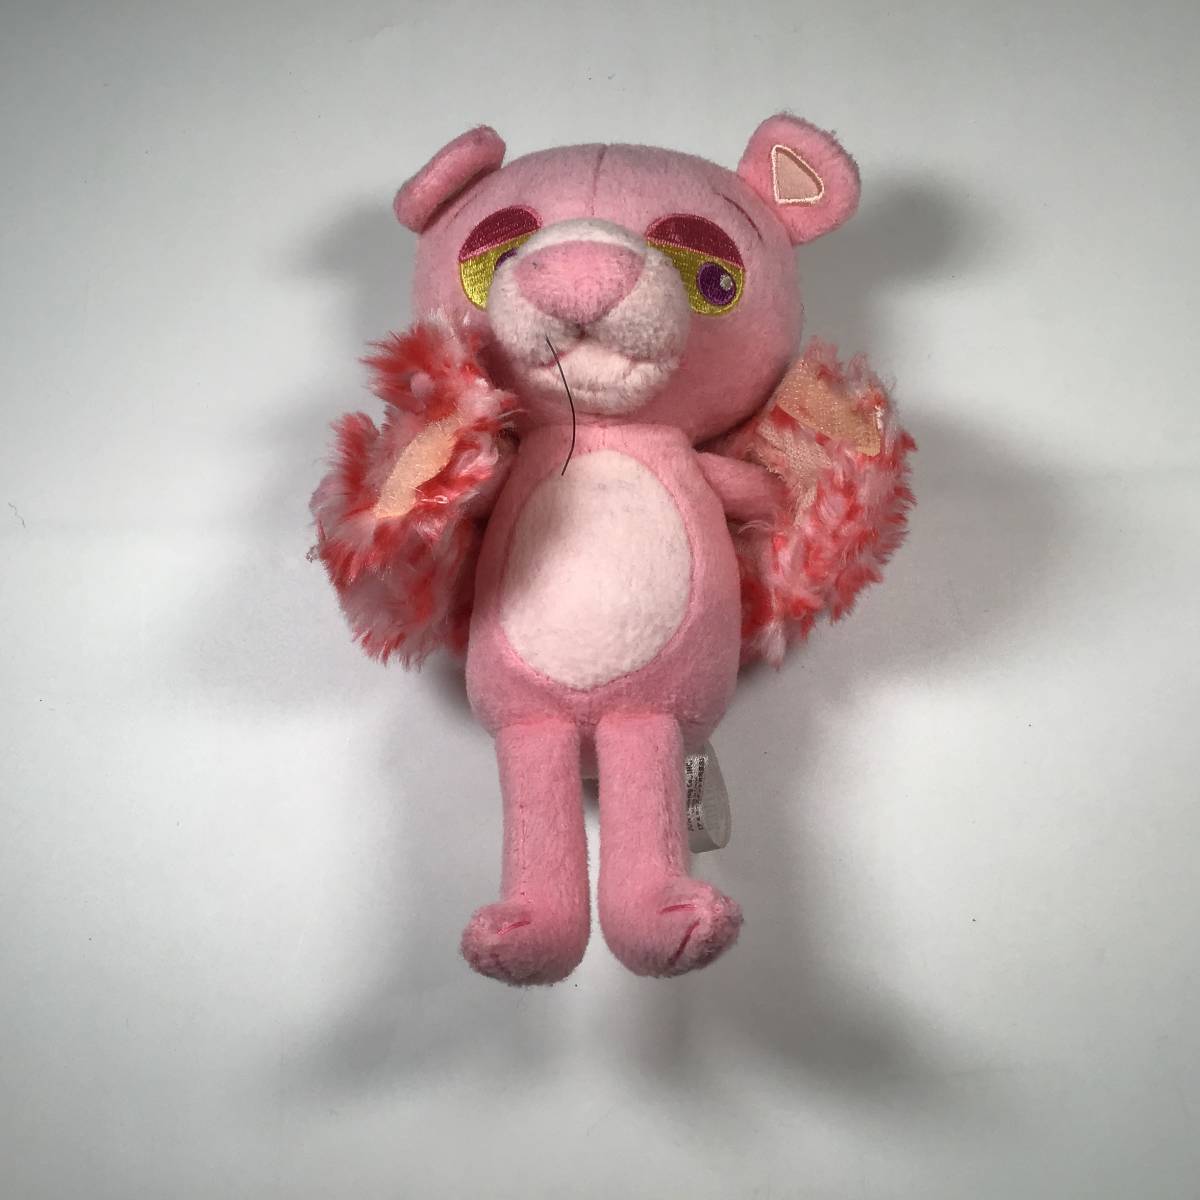 N-1192☆ ピンクパンサー　The Pink Panther　ピンクの豹　ぬいぐるみ　商品タグ無し　動物　ひょう　ヒョウ_画像9